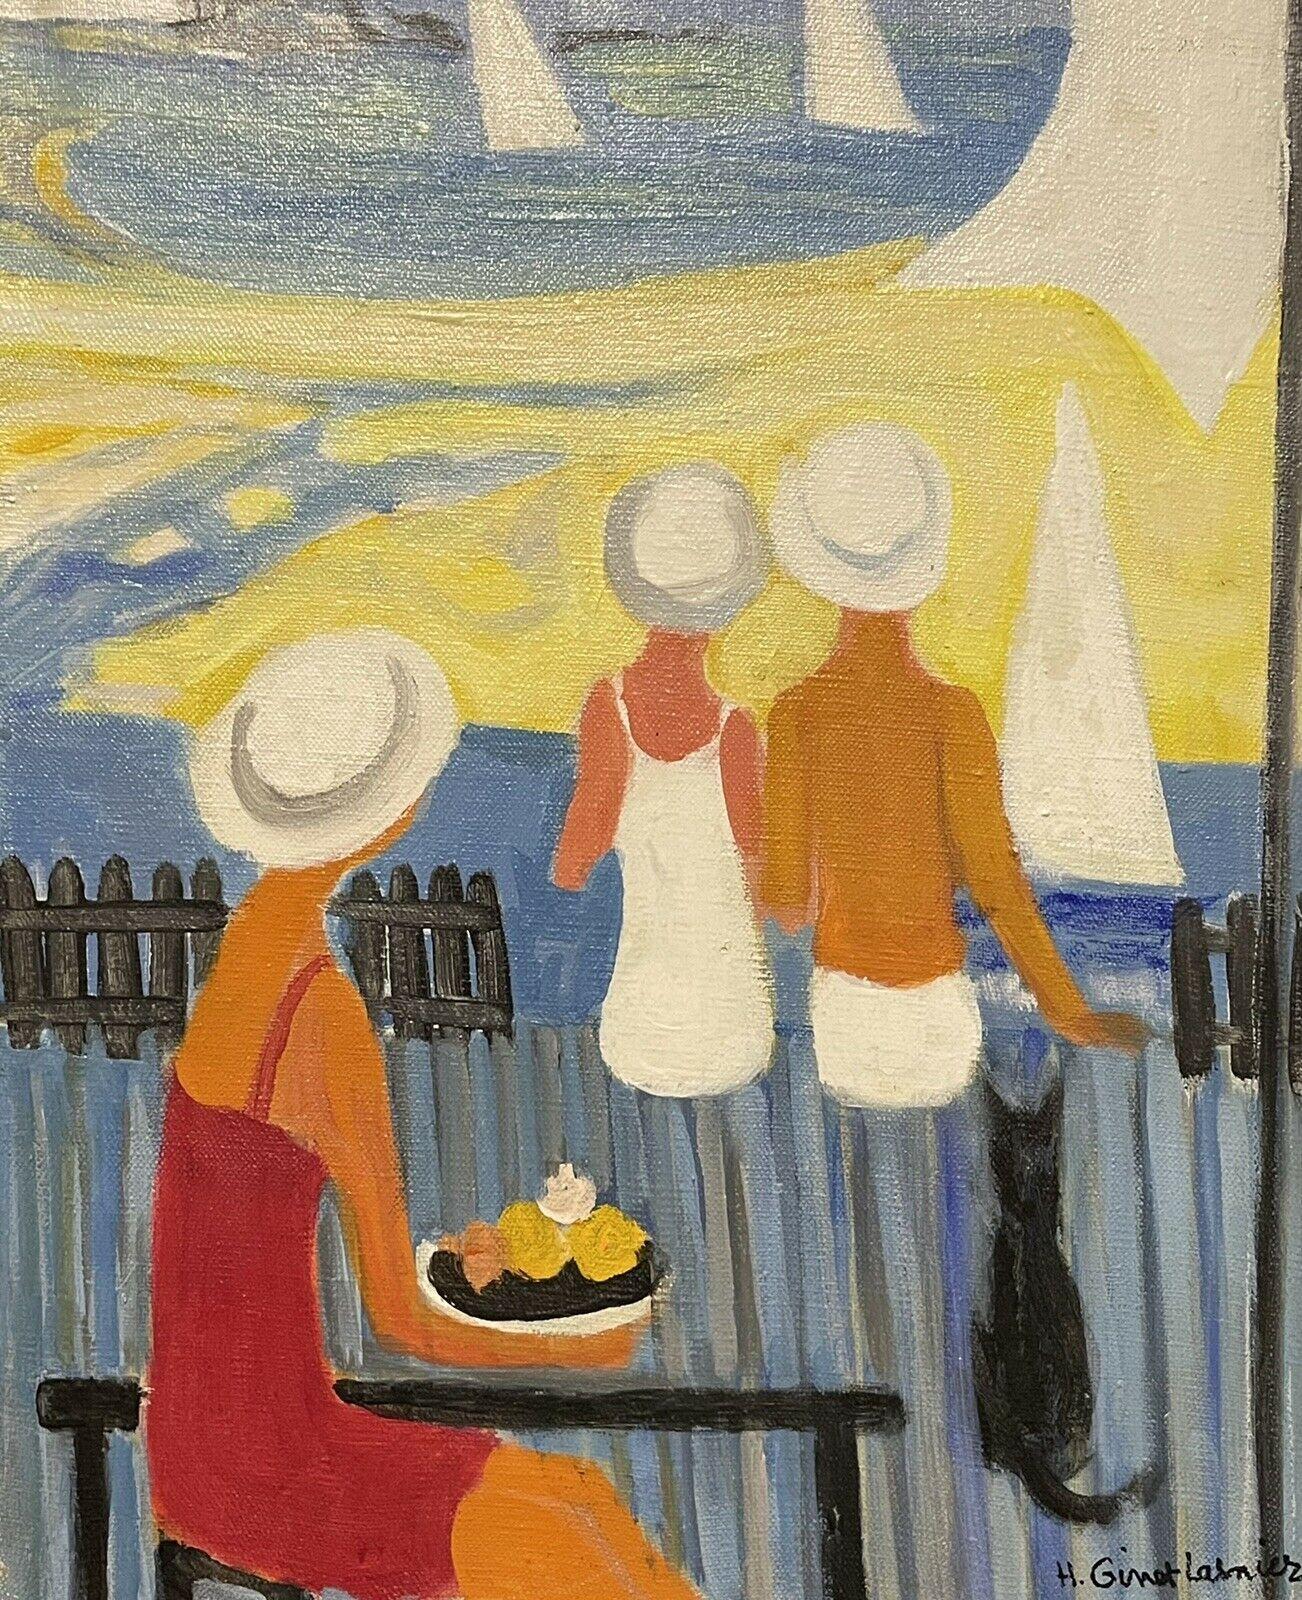 GINET-LASNIER (1927-2020) FRENCH OIL - MODERNIST FIGURES ON BEACH CAFE TERRACE - Impressionist Painting by Unknown